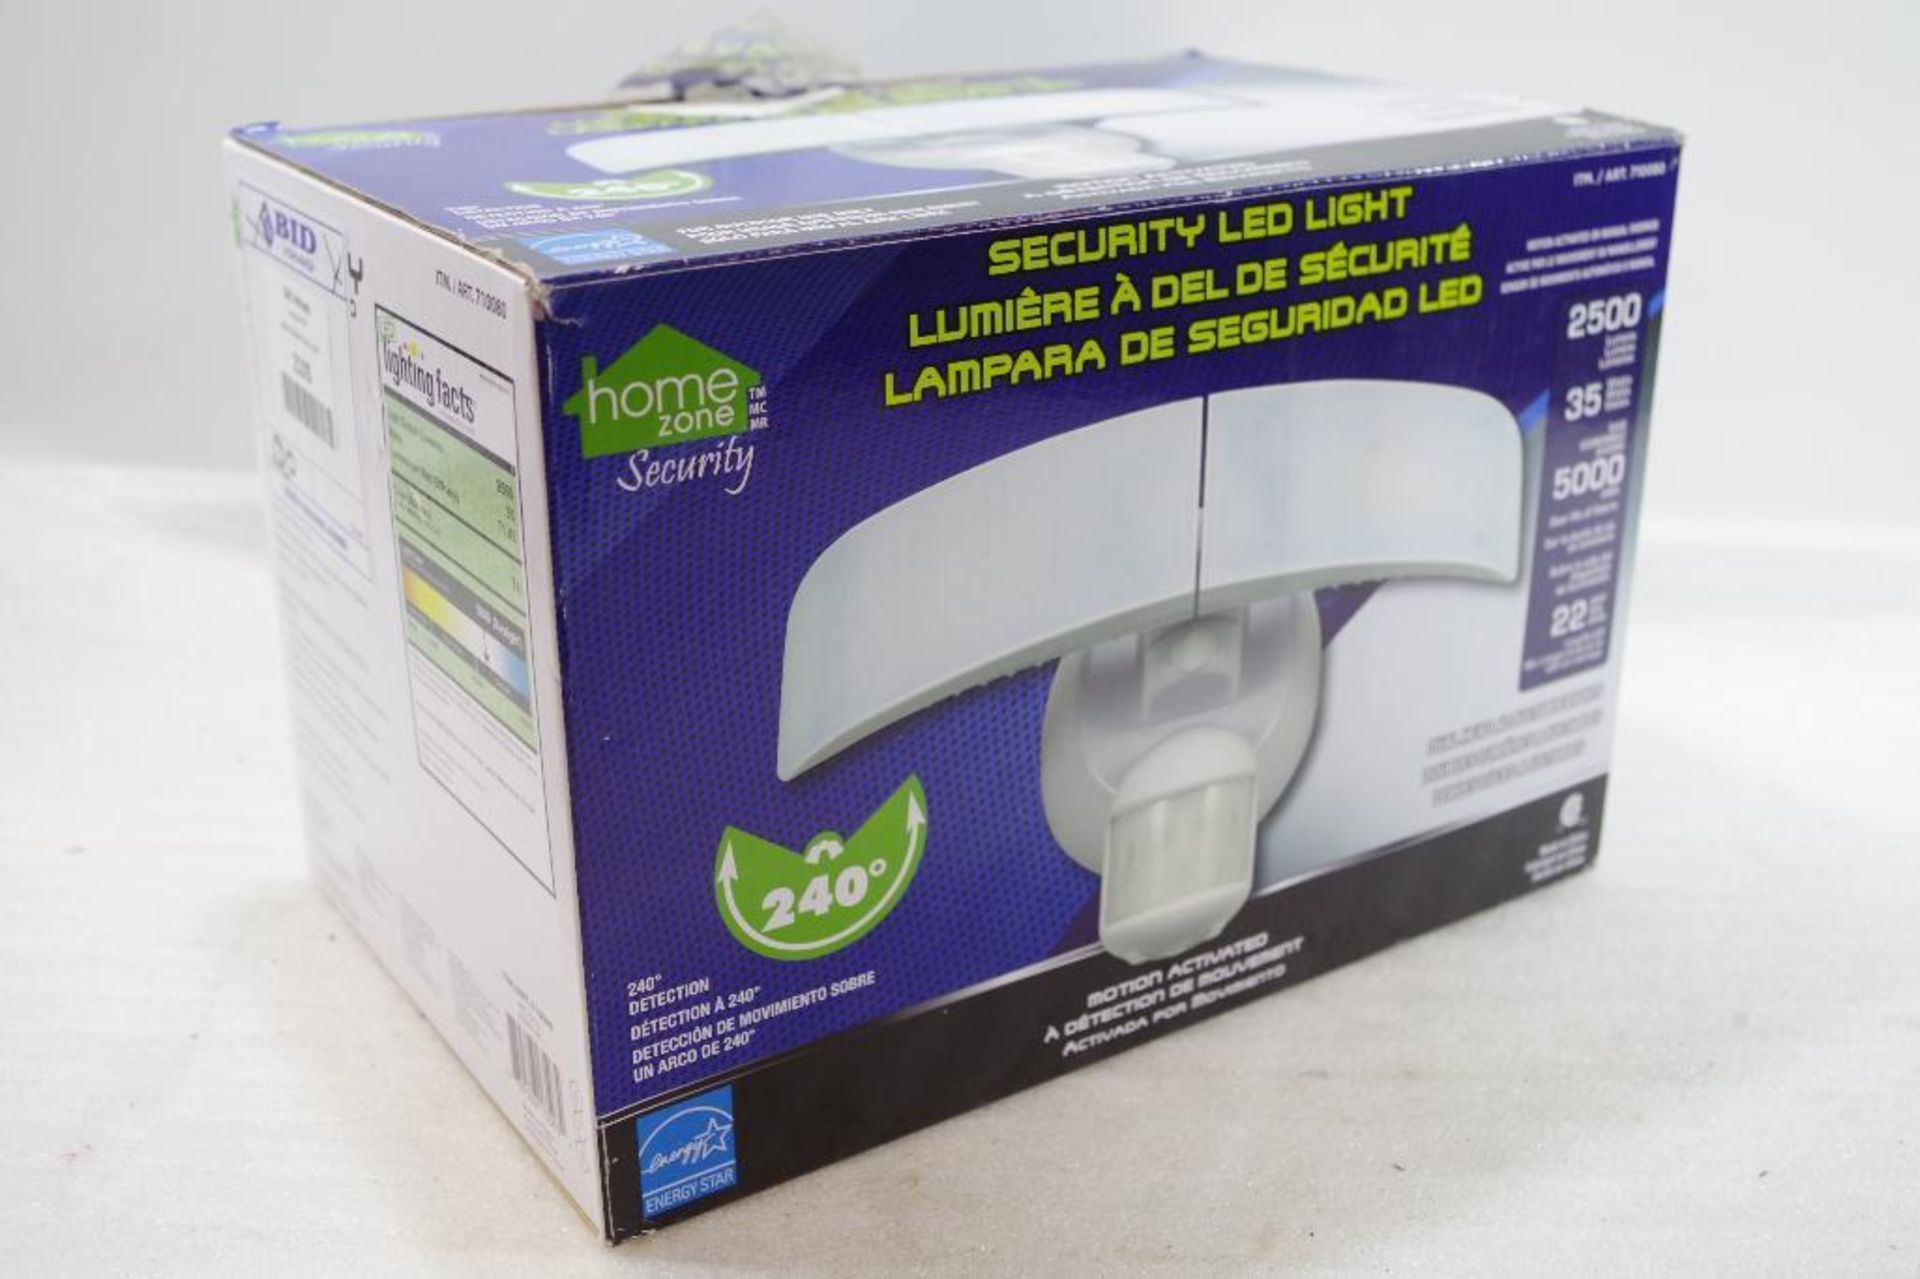 HOME ZONE 2500 Lumens Motion Activated Security LED Light - Image 3 of 3